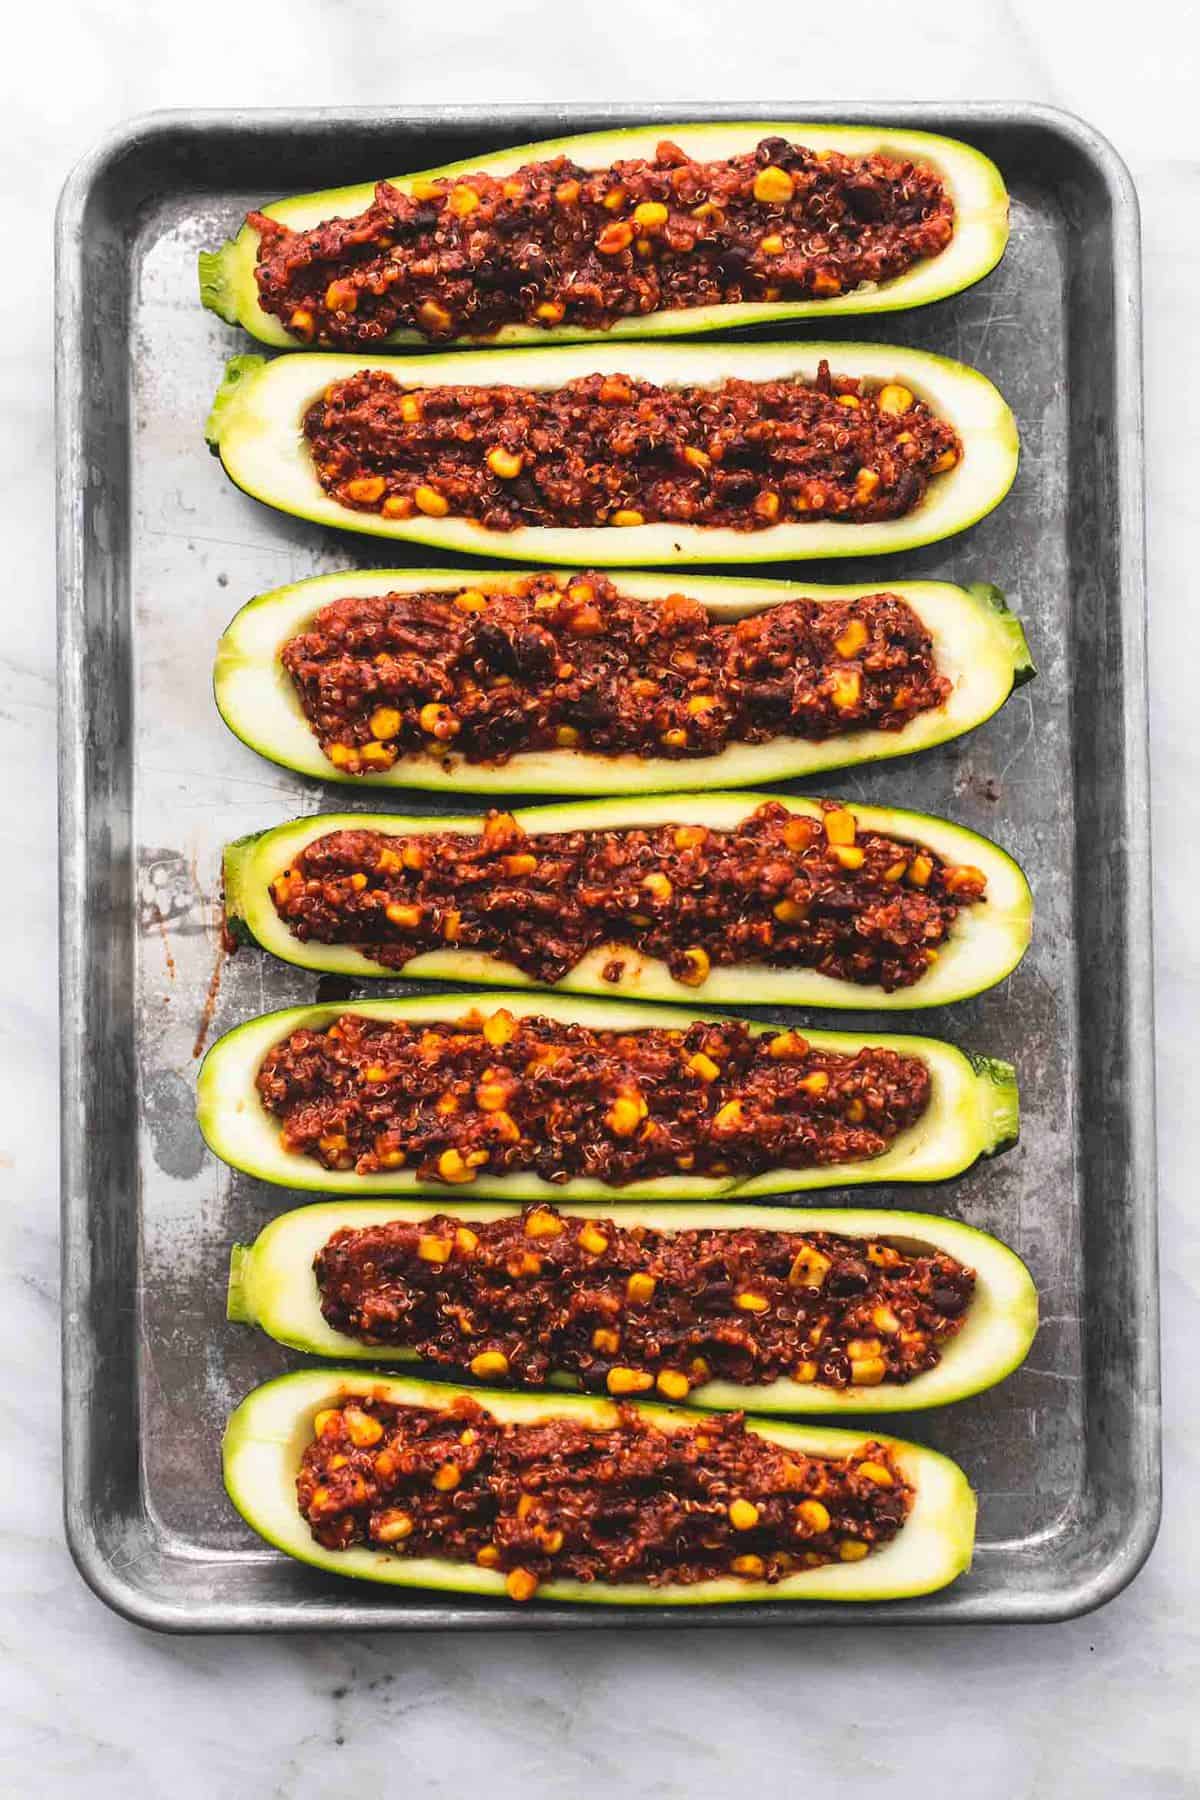 top view of enchilada quinoa stuffed zucchini boats without cheese and toppings on them on a baking sheet.